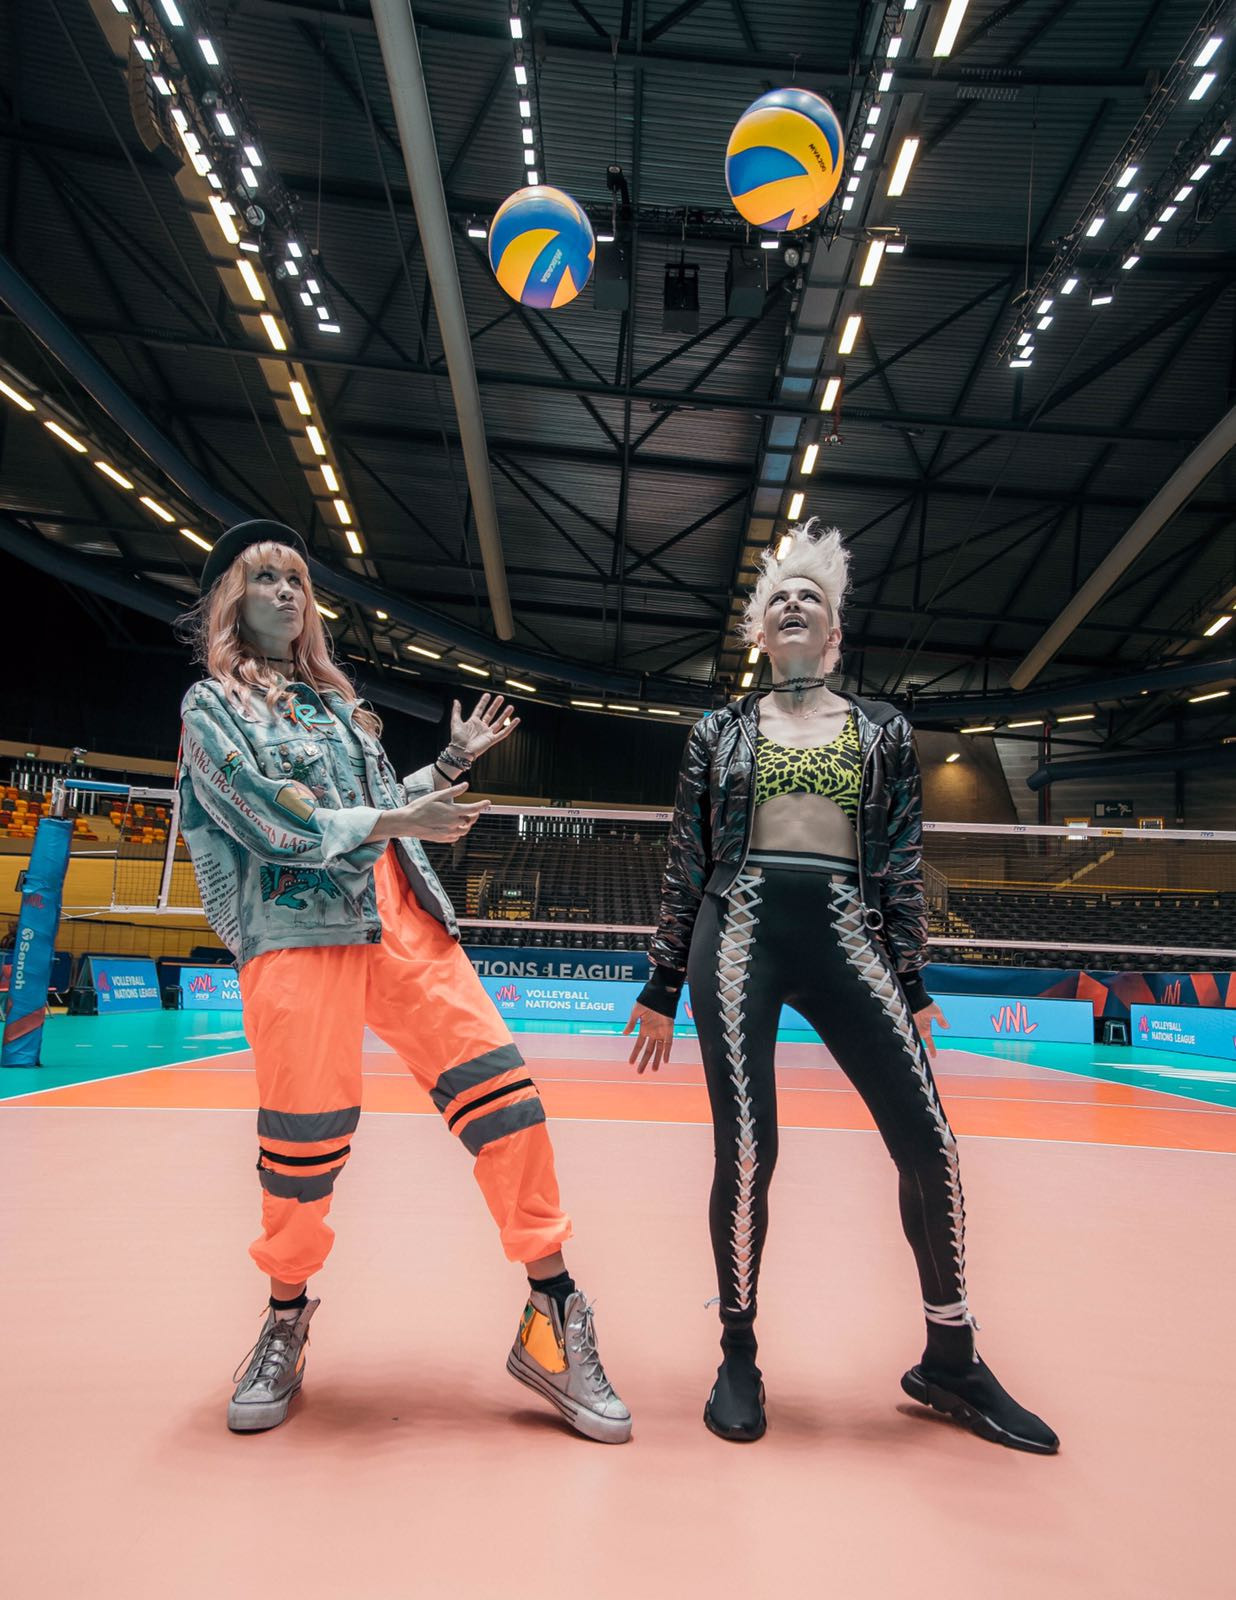 Volleyball Nations League team up with award winning DJ duo NERVO to improve fan experience